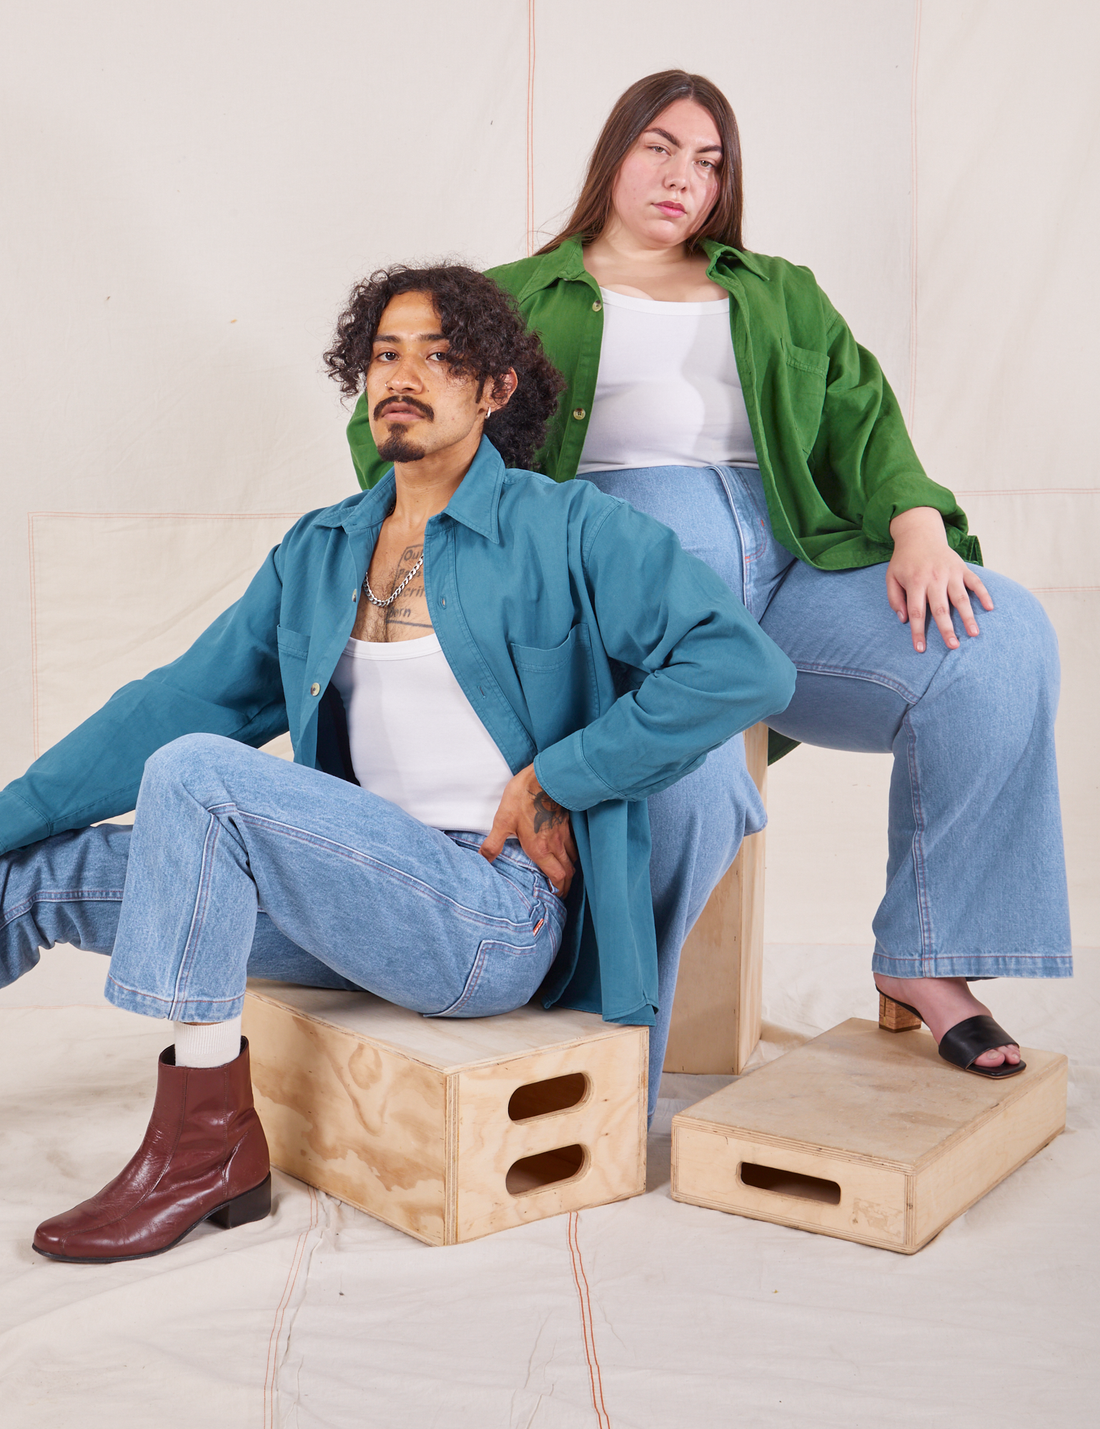 Jesse is wearing Oversize Overshirt in Marine Blue and Marielena is wearing Oversize Overshirt in Lawn Green